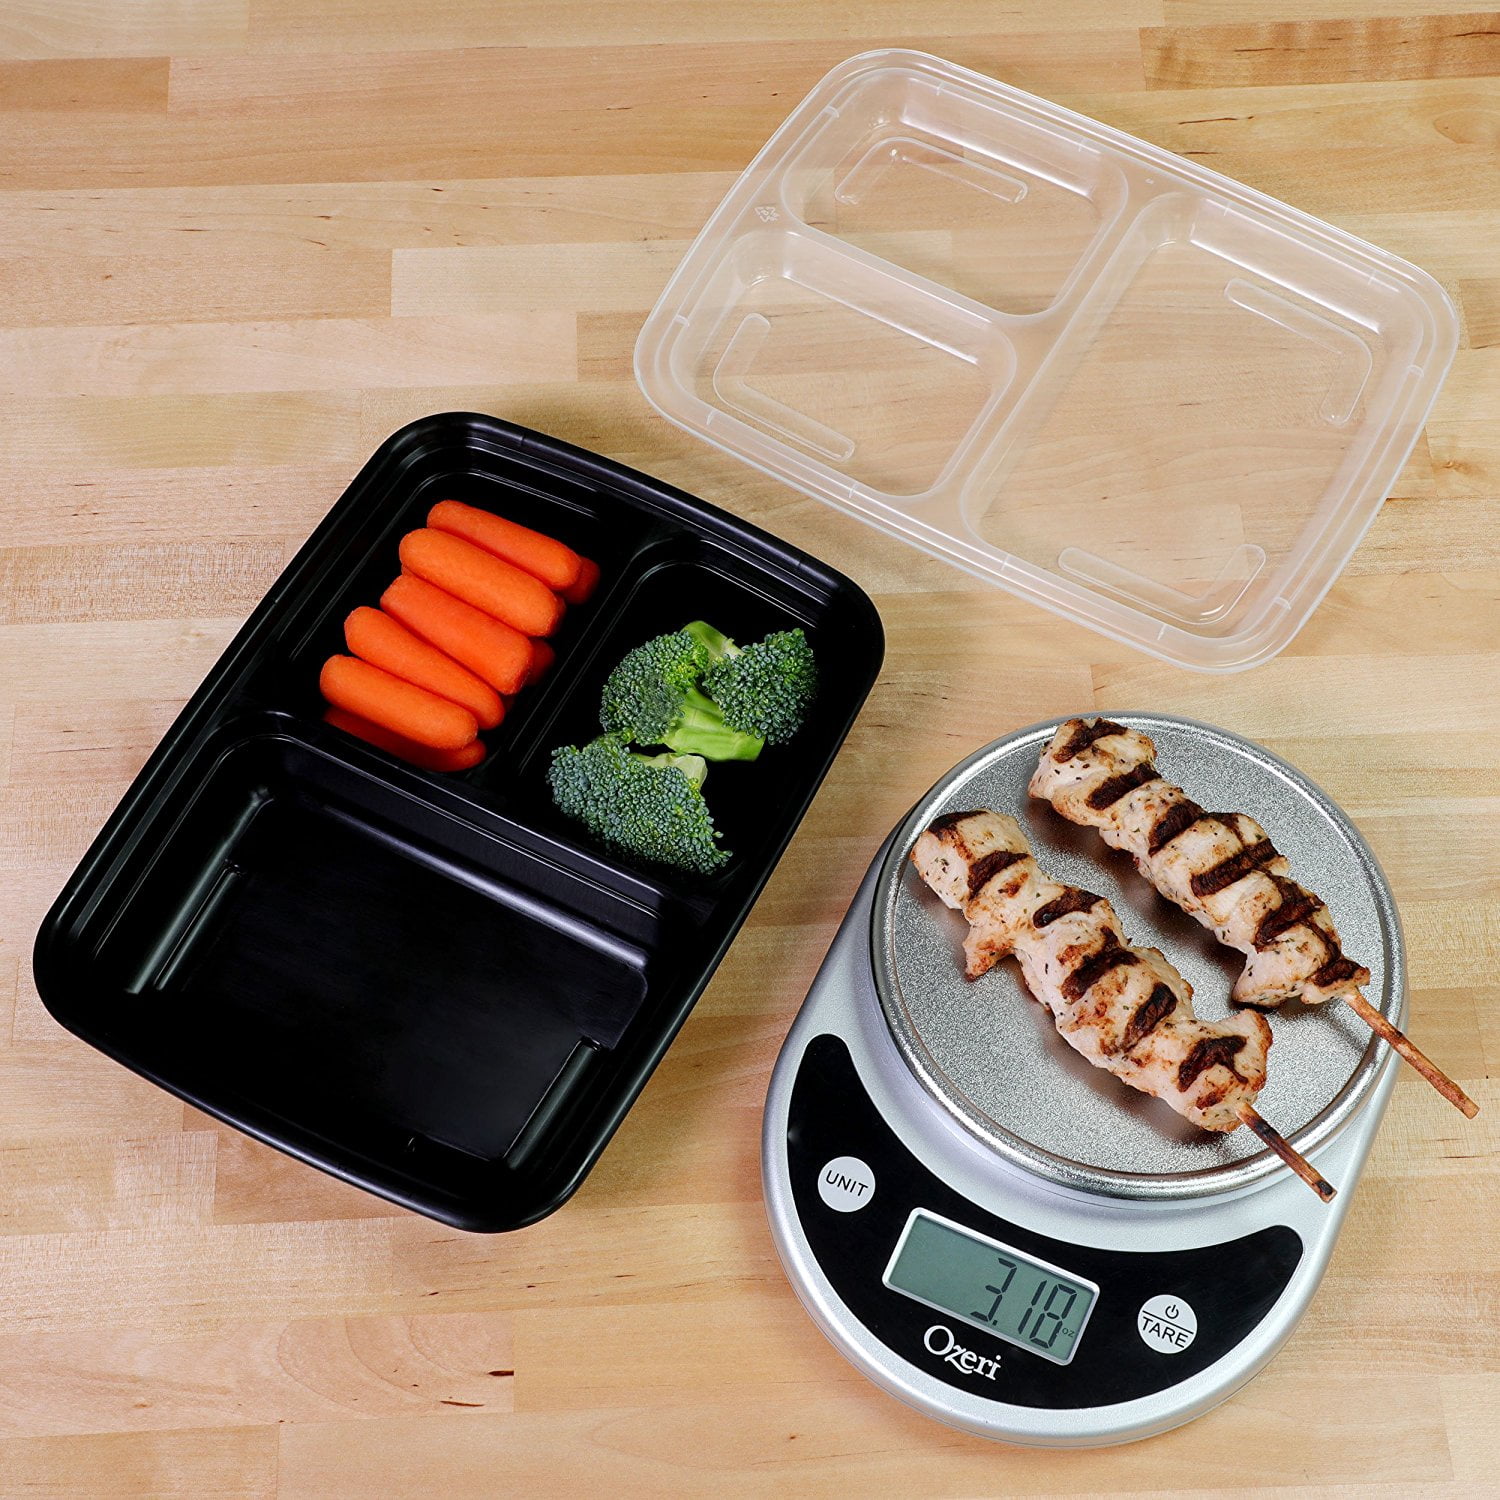 12 Meal Prep Containers 3 Compartment Plate W/ Lids Reusable Food